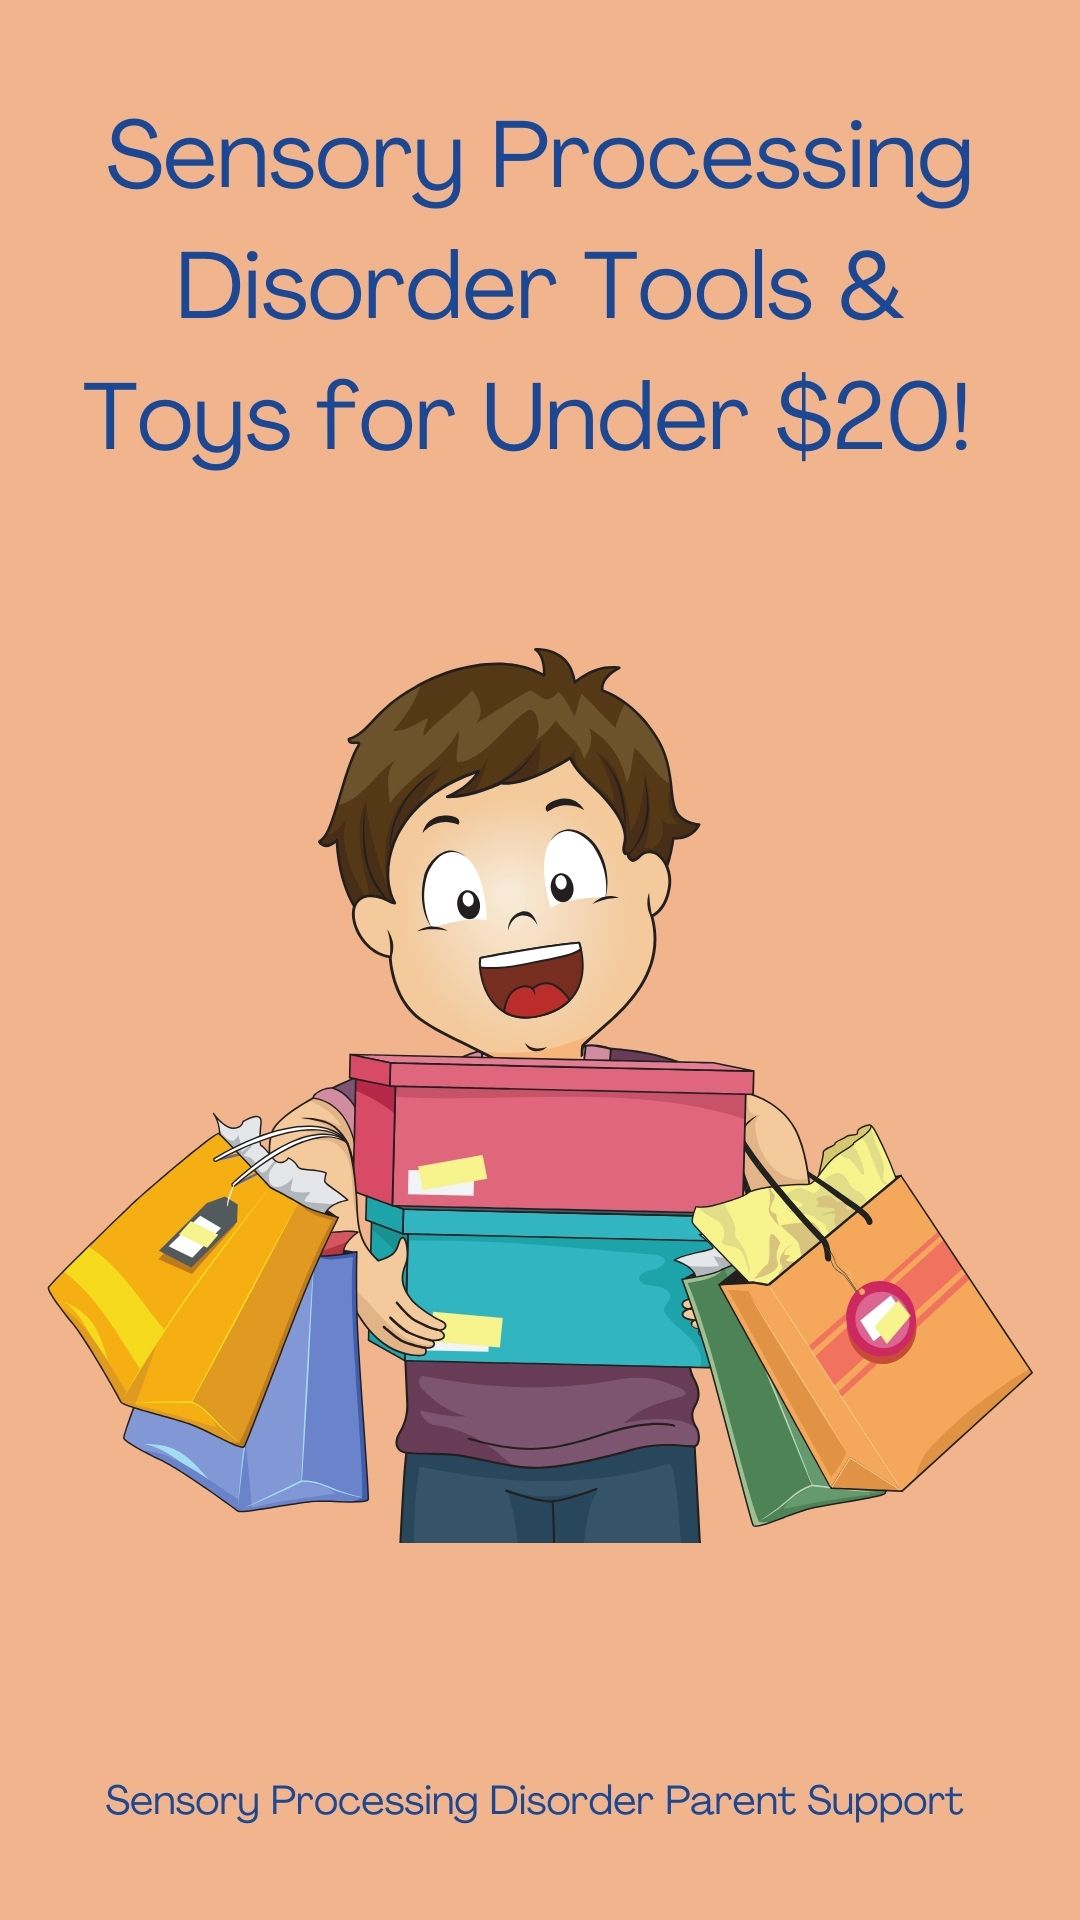 Sensory Processing Disorder Tools & Toys for Under $20!